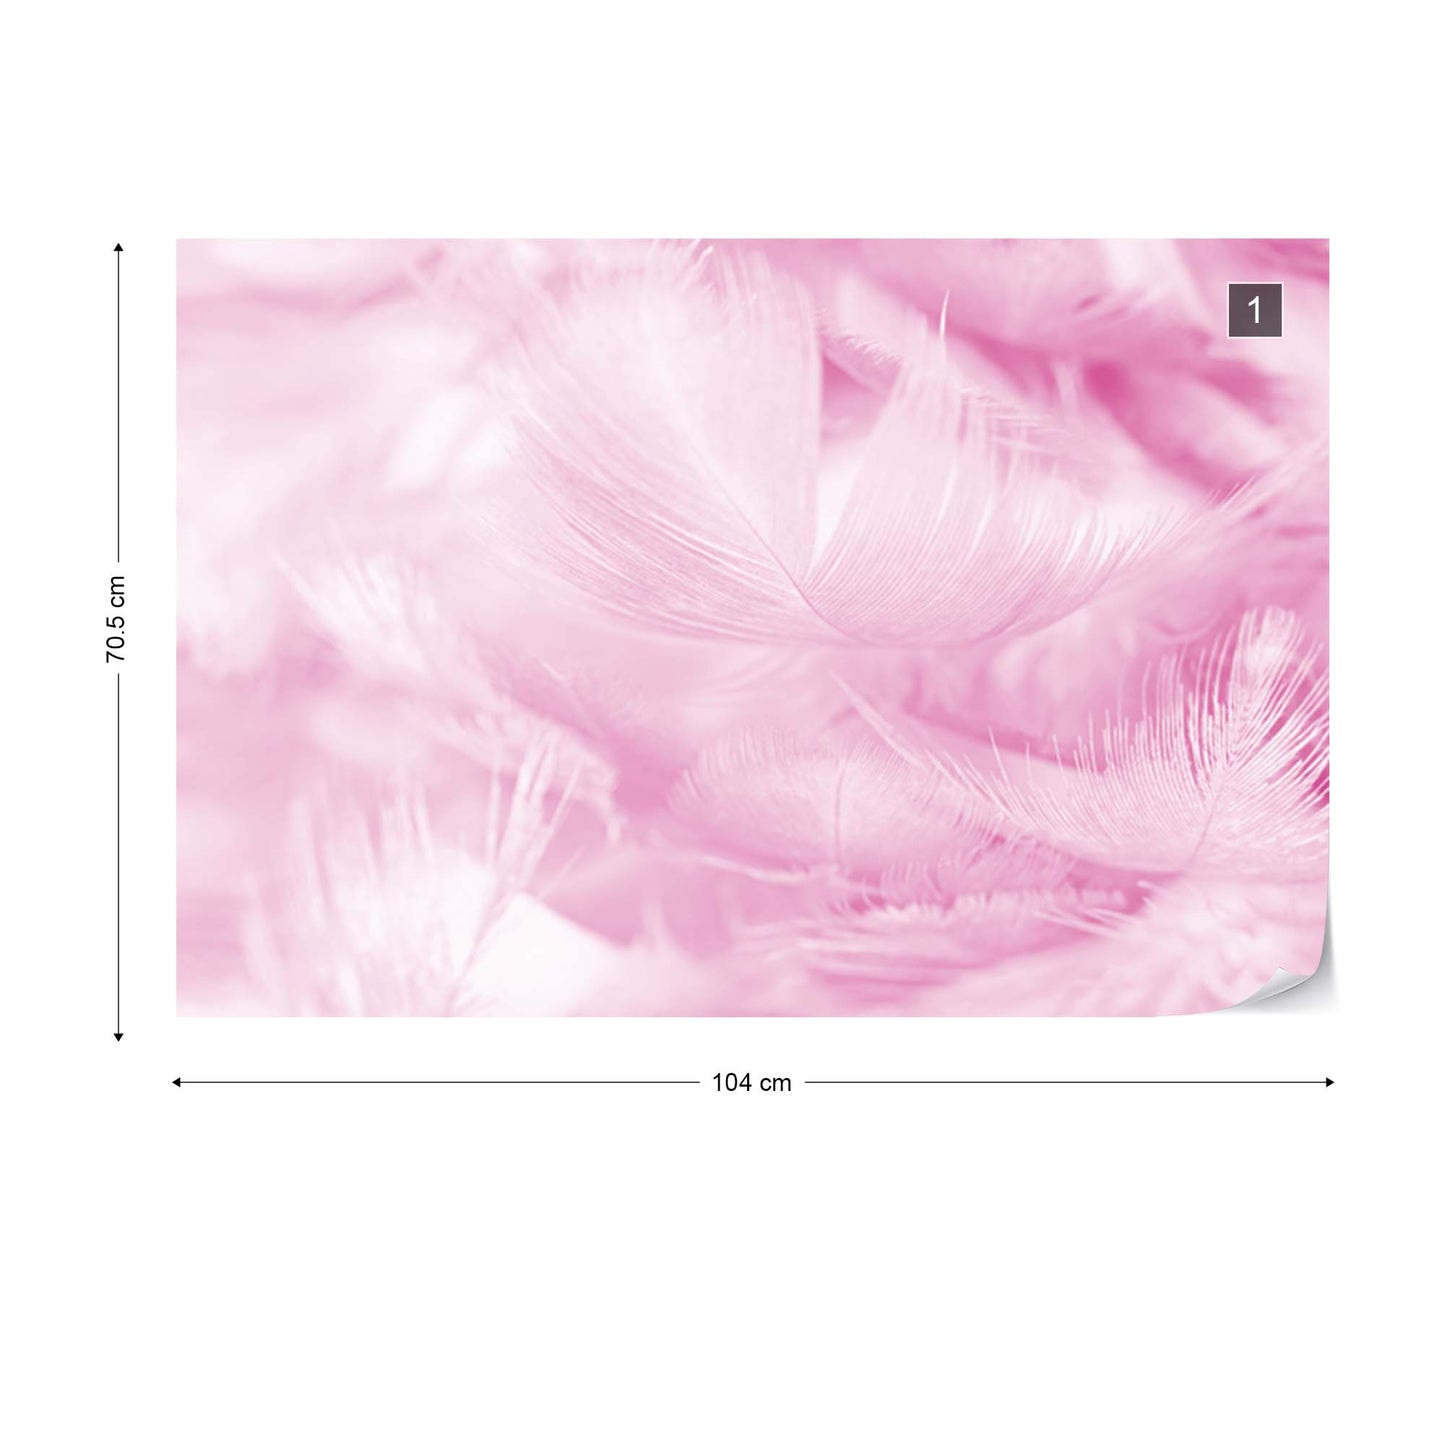 Feathers in Pink Wallpaper Waterproof for Rooms Bathroom Kitchen - USTAD HOME